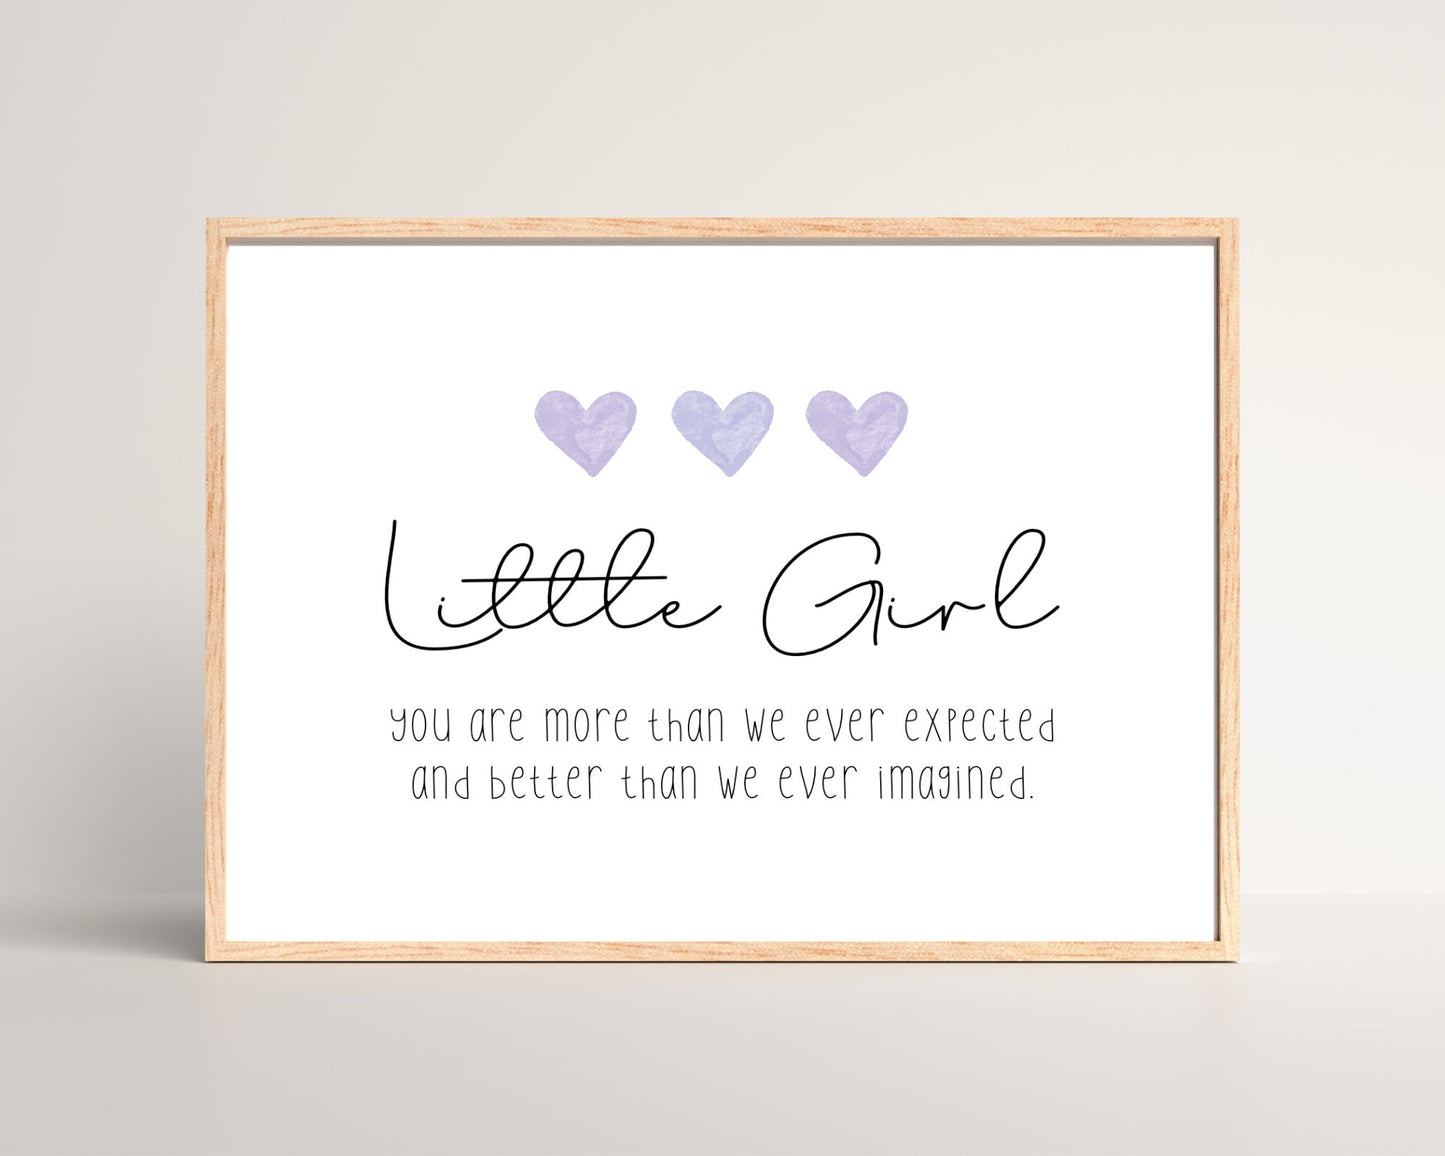 A little girl’s room digital print that has three purple hearts at the top, and a piece of writing that says: “Little girl, you are more than we ever expected and better than we ever imagined.”